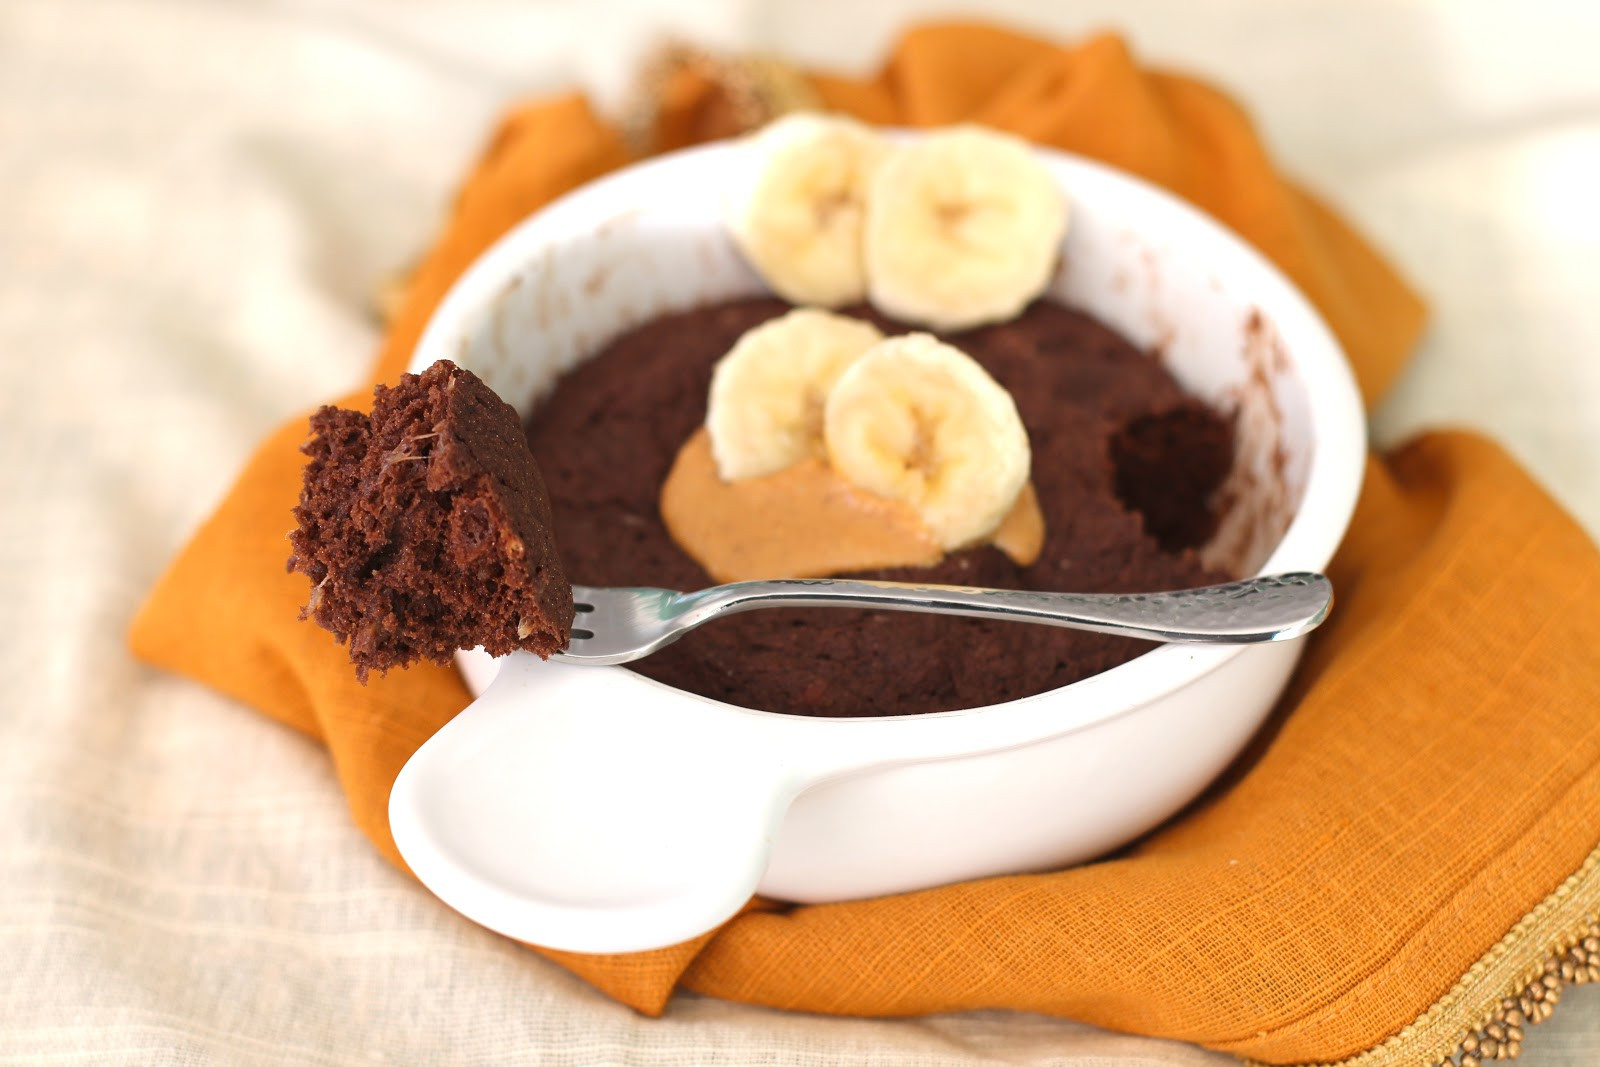 Banana Desserts Healthy 20 Of the Best Ideas for Healthy Single Serving Chocolate Peanut butter Banana